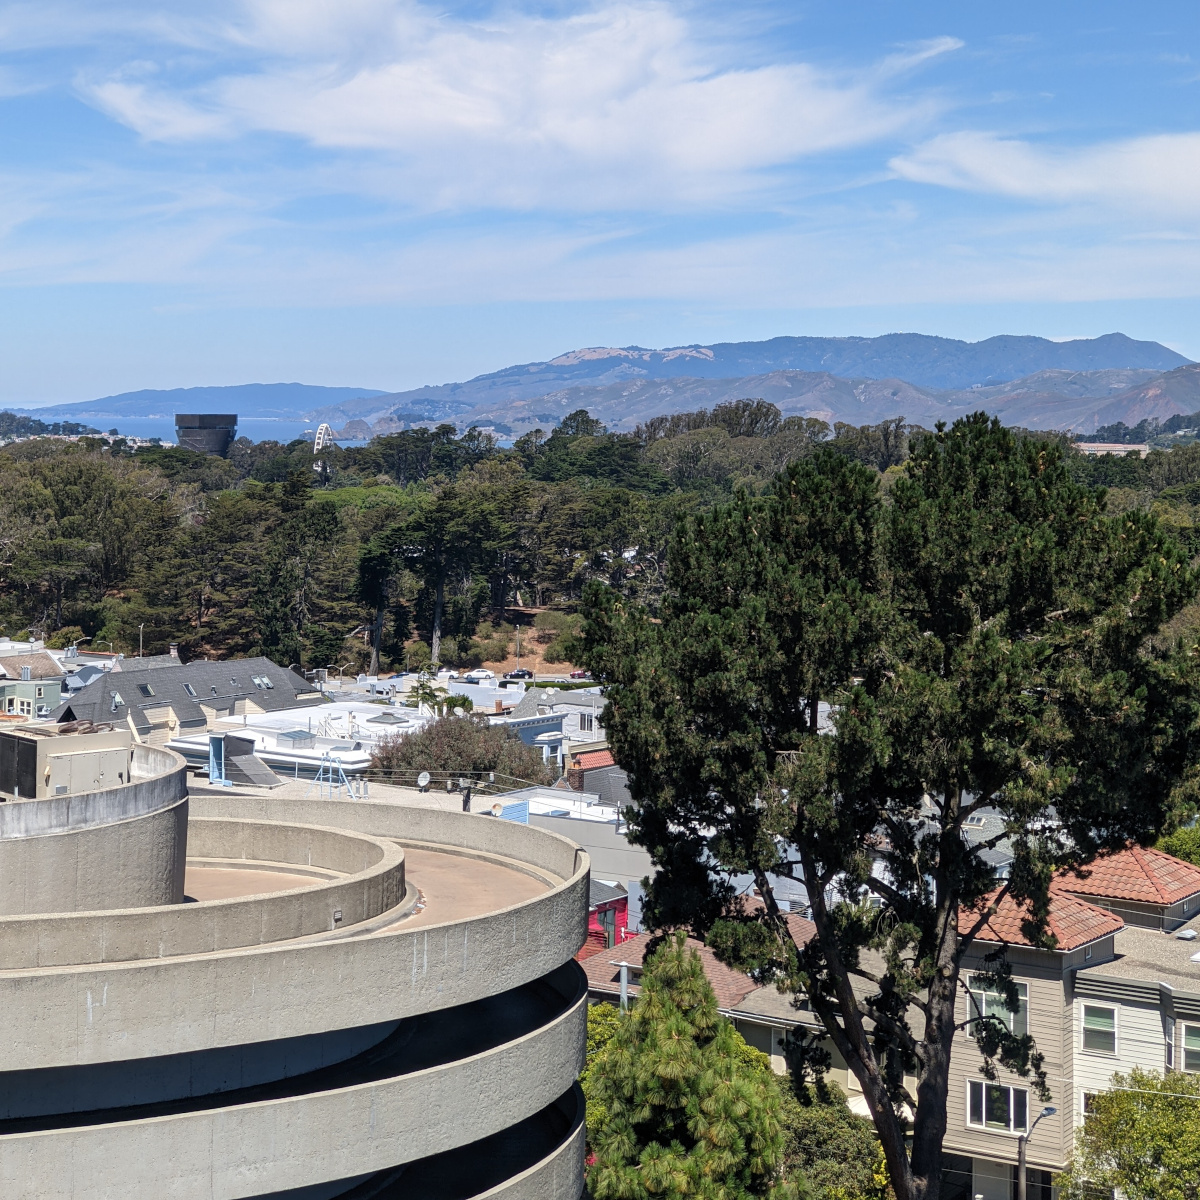 rooftops, treetops, a few pixels of the Golden Gate, a little bit of the Pacific Ocean, and in the distance: the Marin Headlands